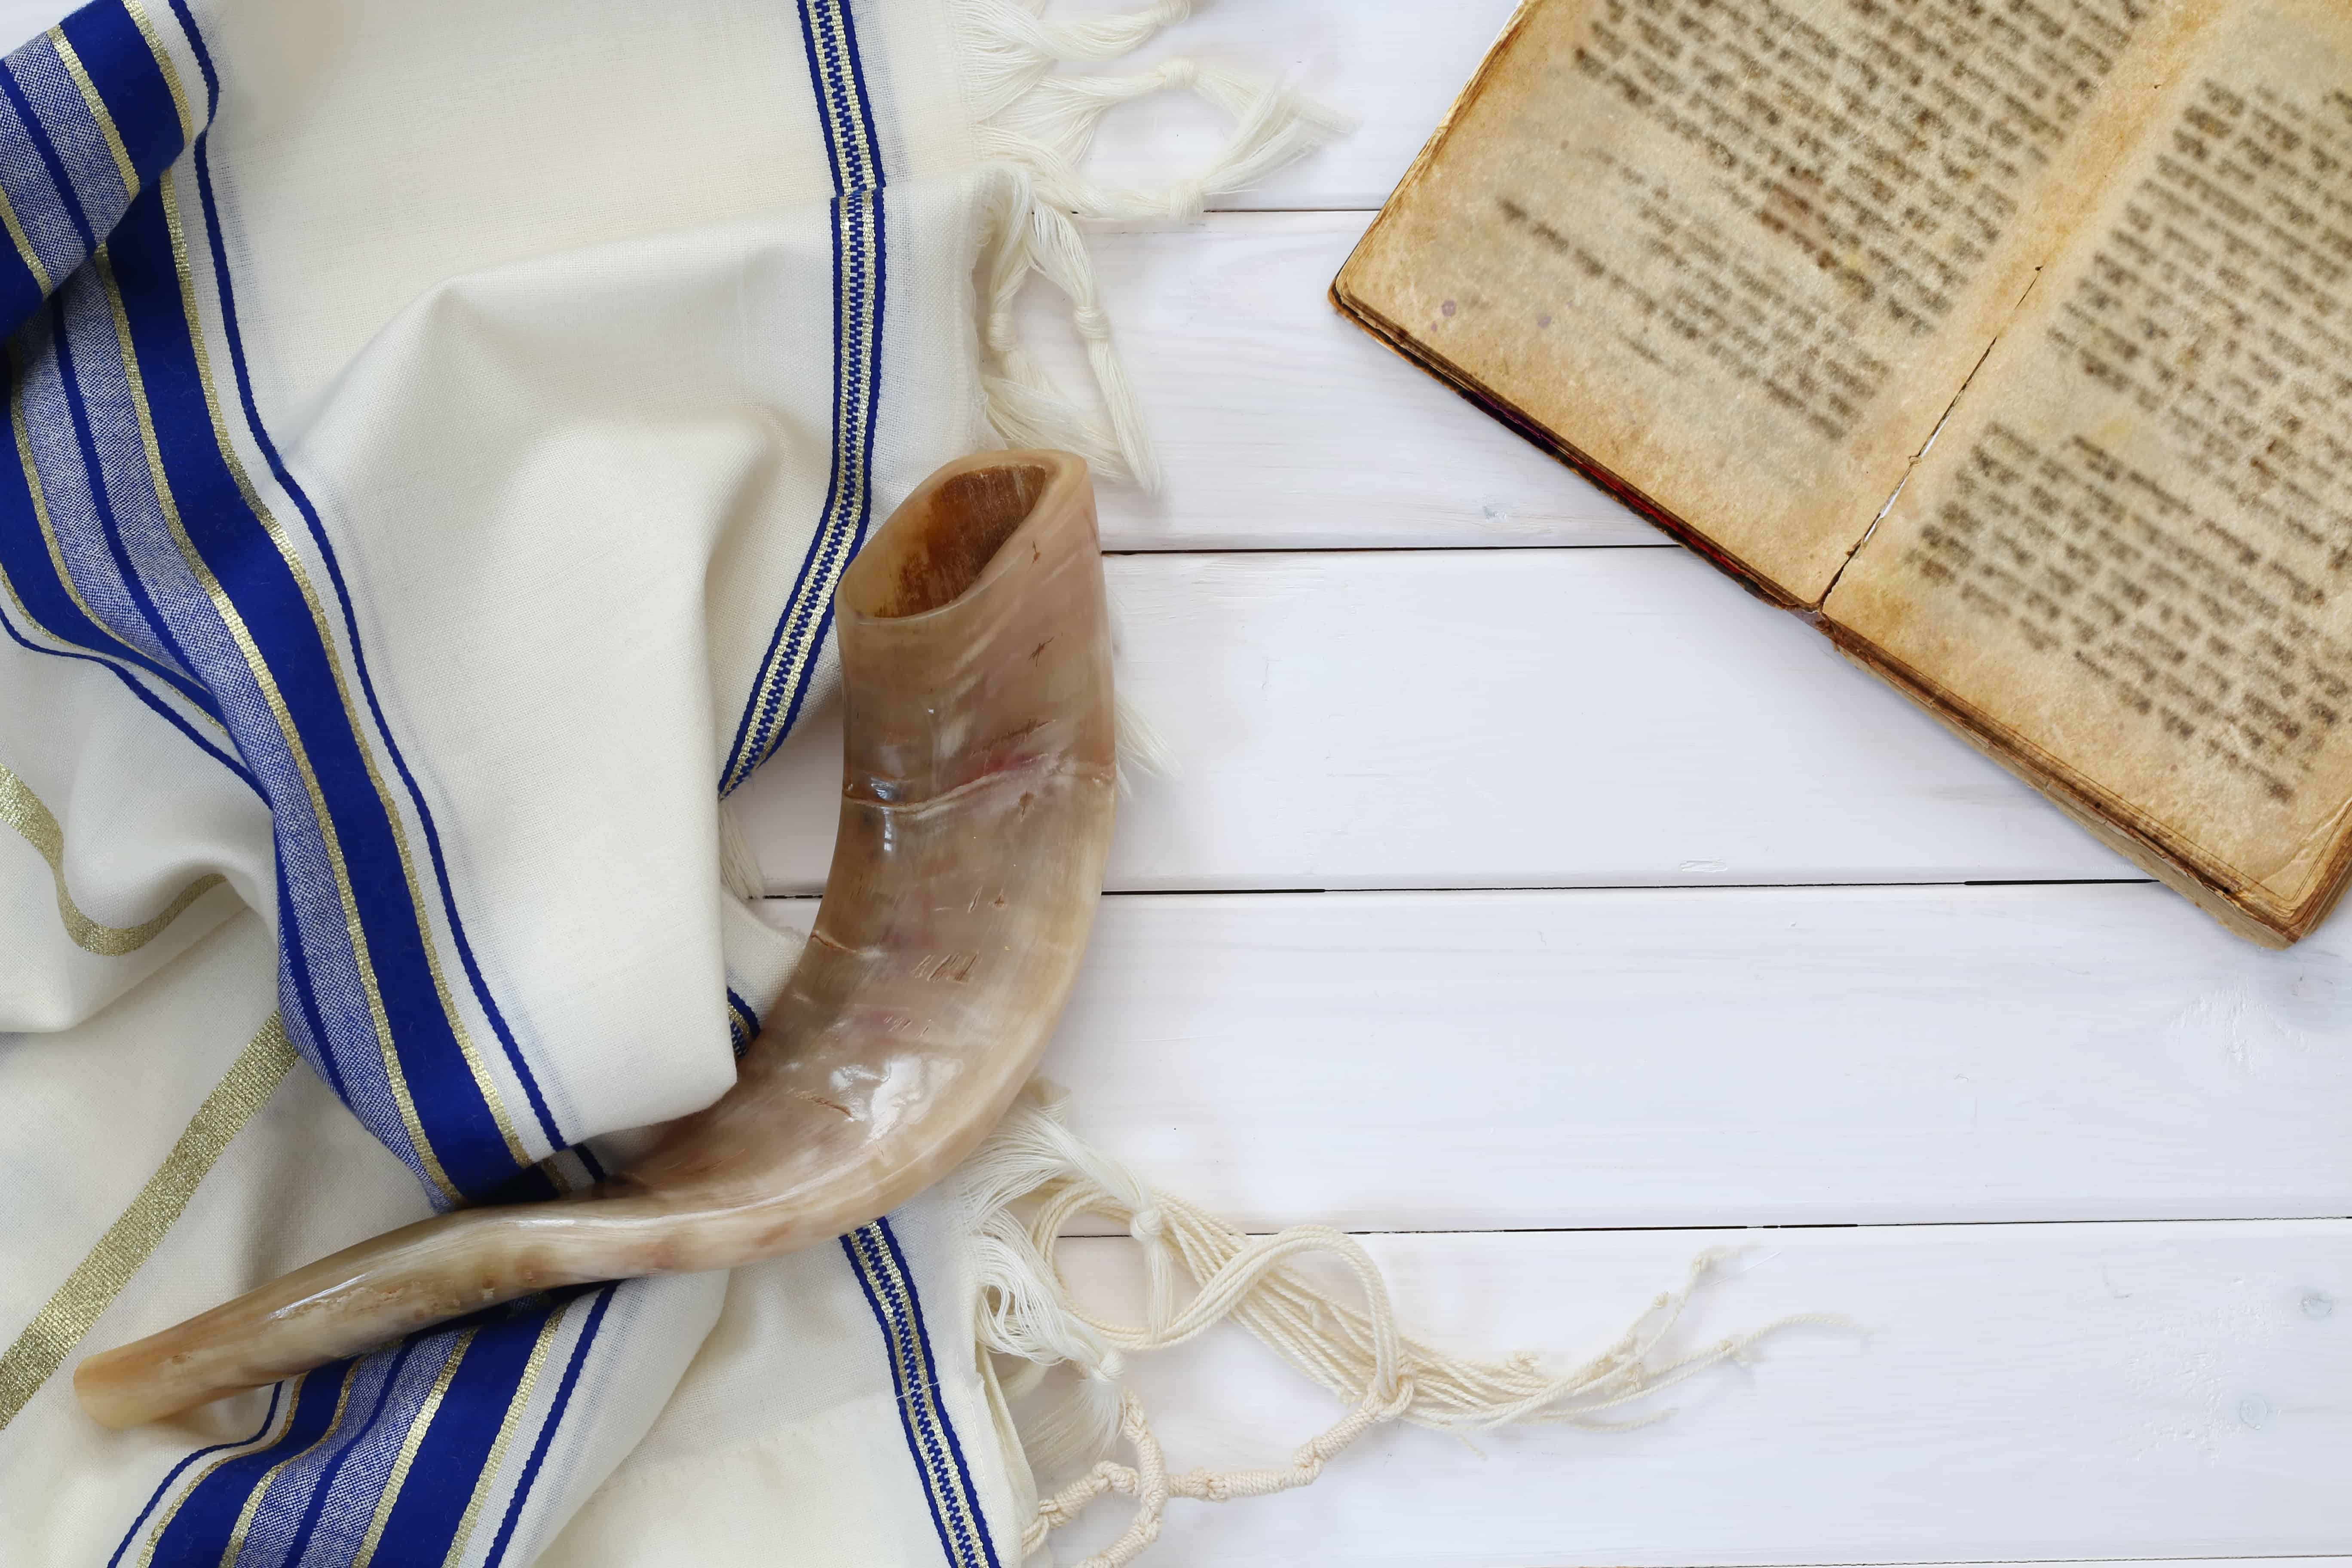 The Fall Jewish Feasts A Time of Spiritual Reflection Finding